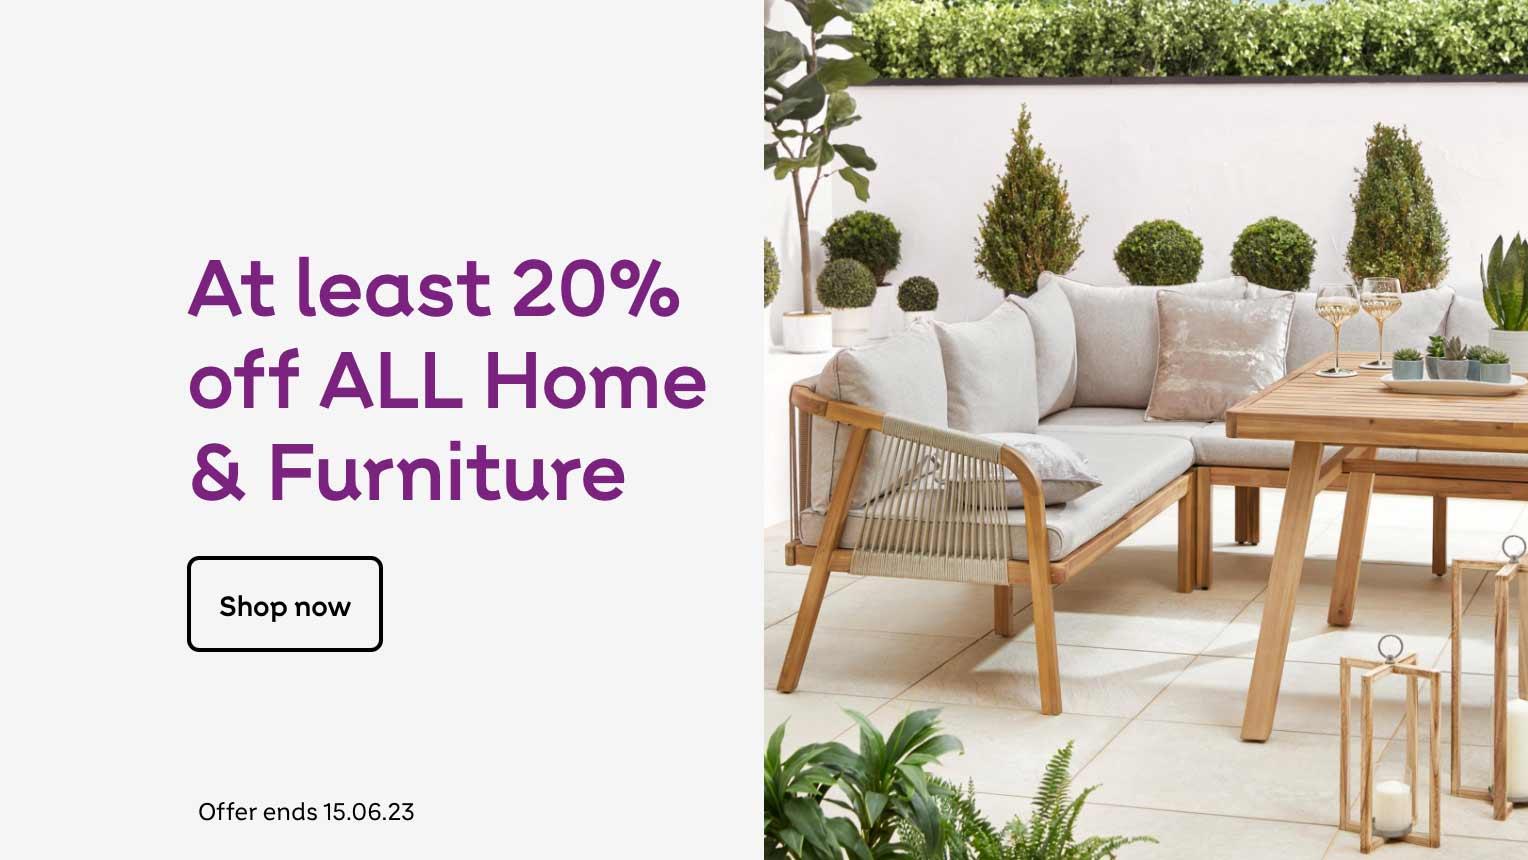 At least 20% off all Home & Furniture. Shop now. Offer ends 15.06.23.